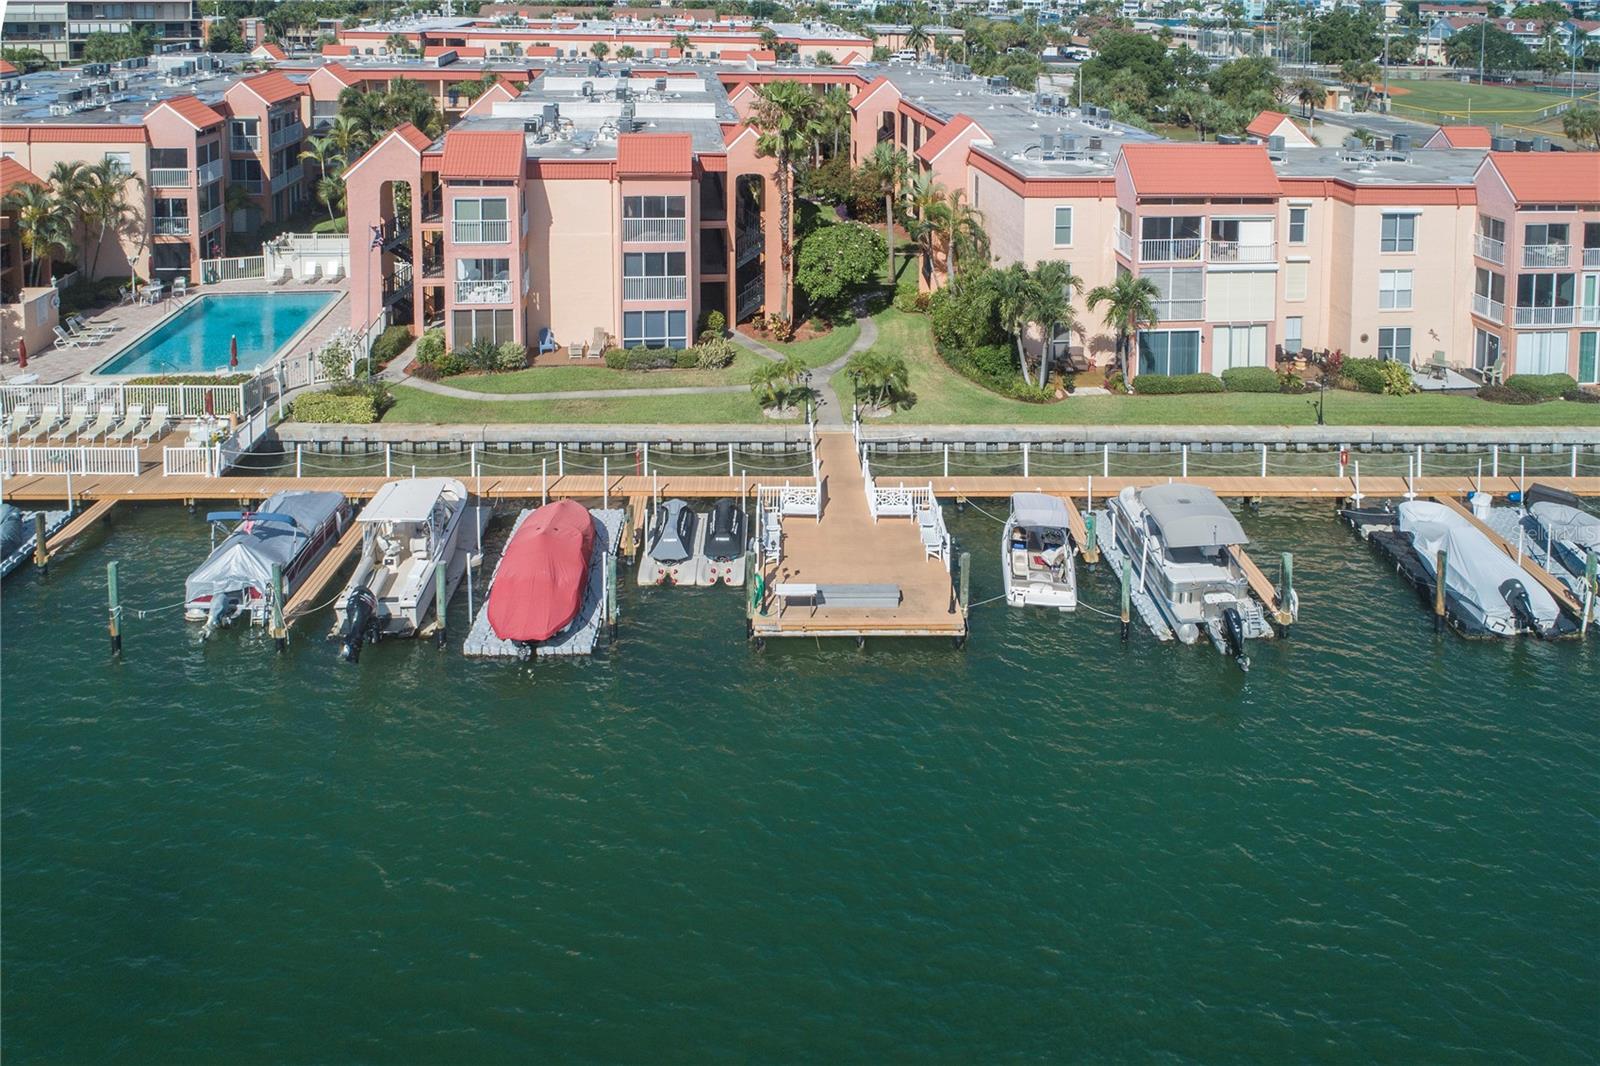 Aerial view of Boca Shores waterfront community.